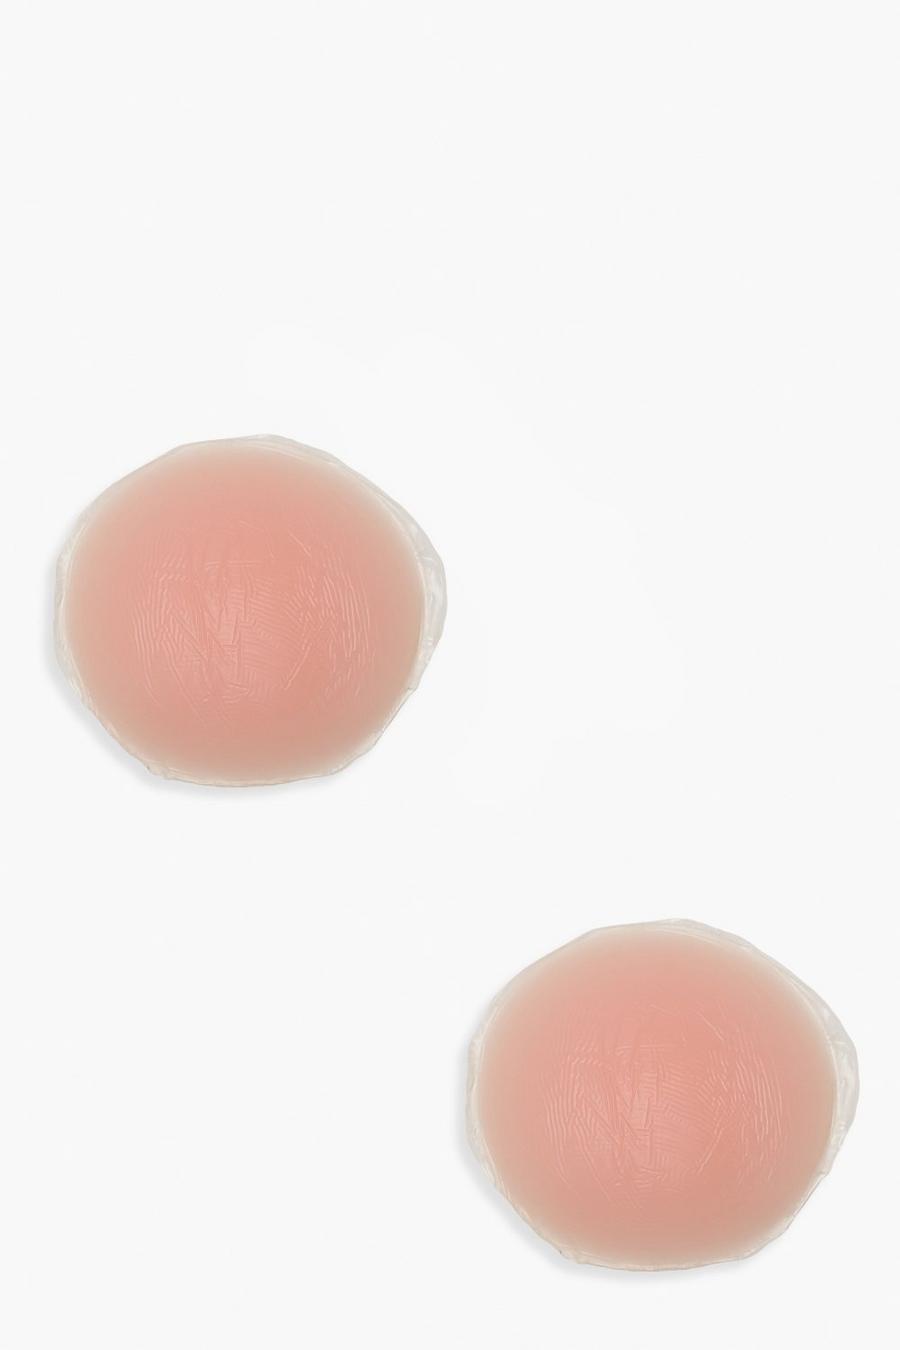 Nude color carne Silicone Nipple Covers - Round